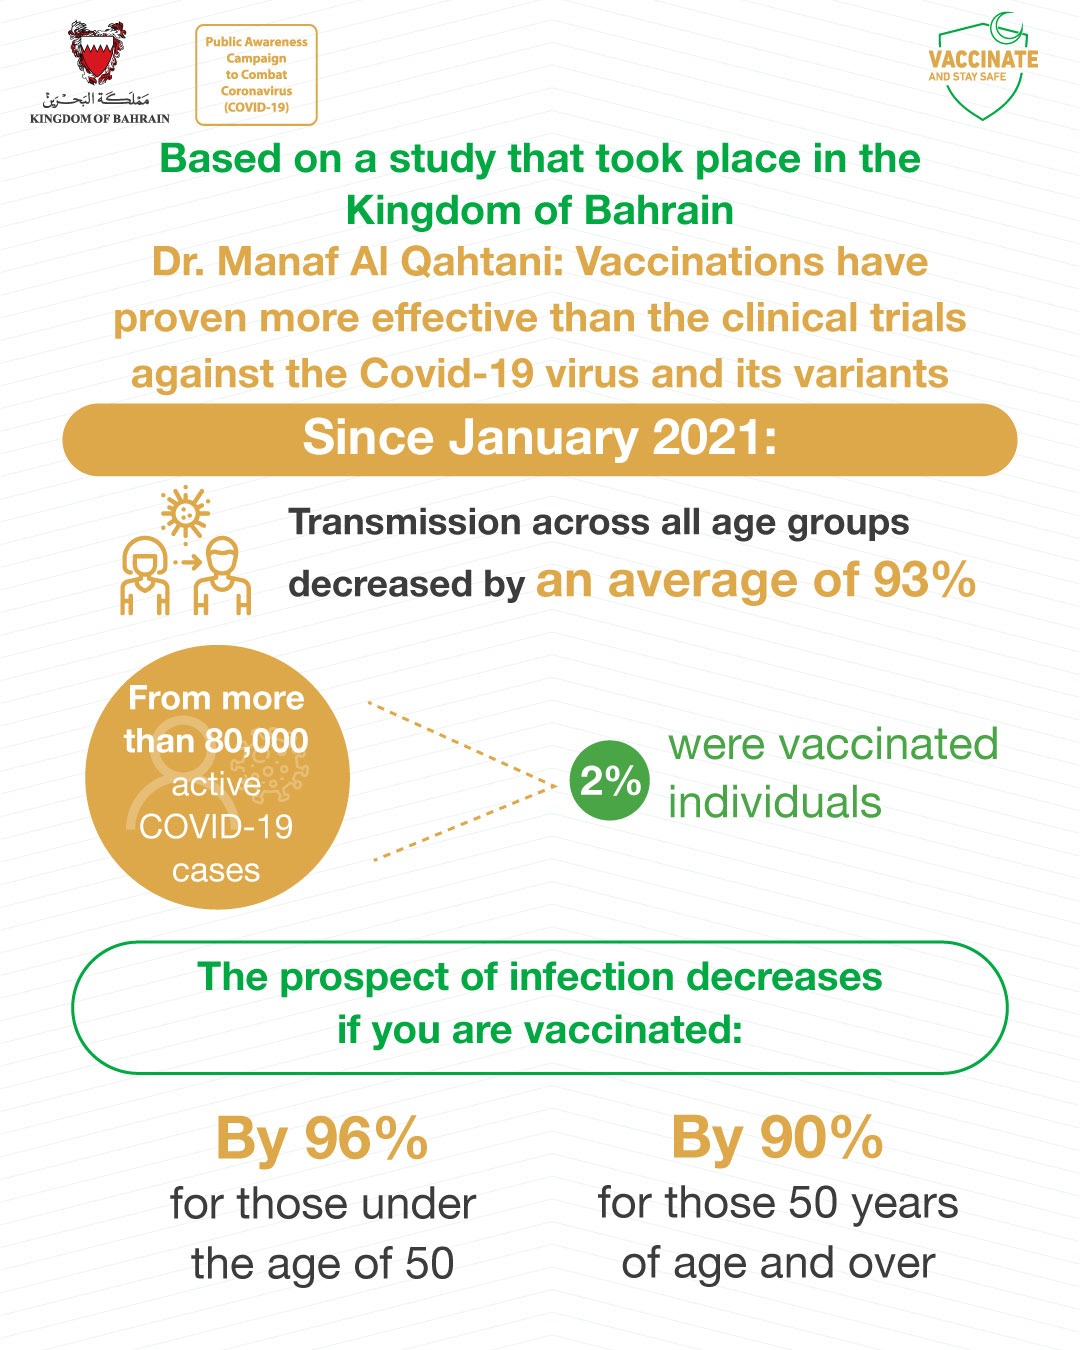 Dr. Al Qahtani highlights the importance of vaccination with medical and scientific backed data